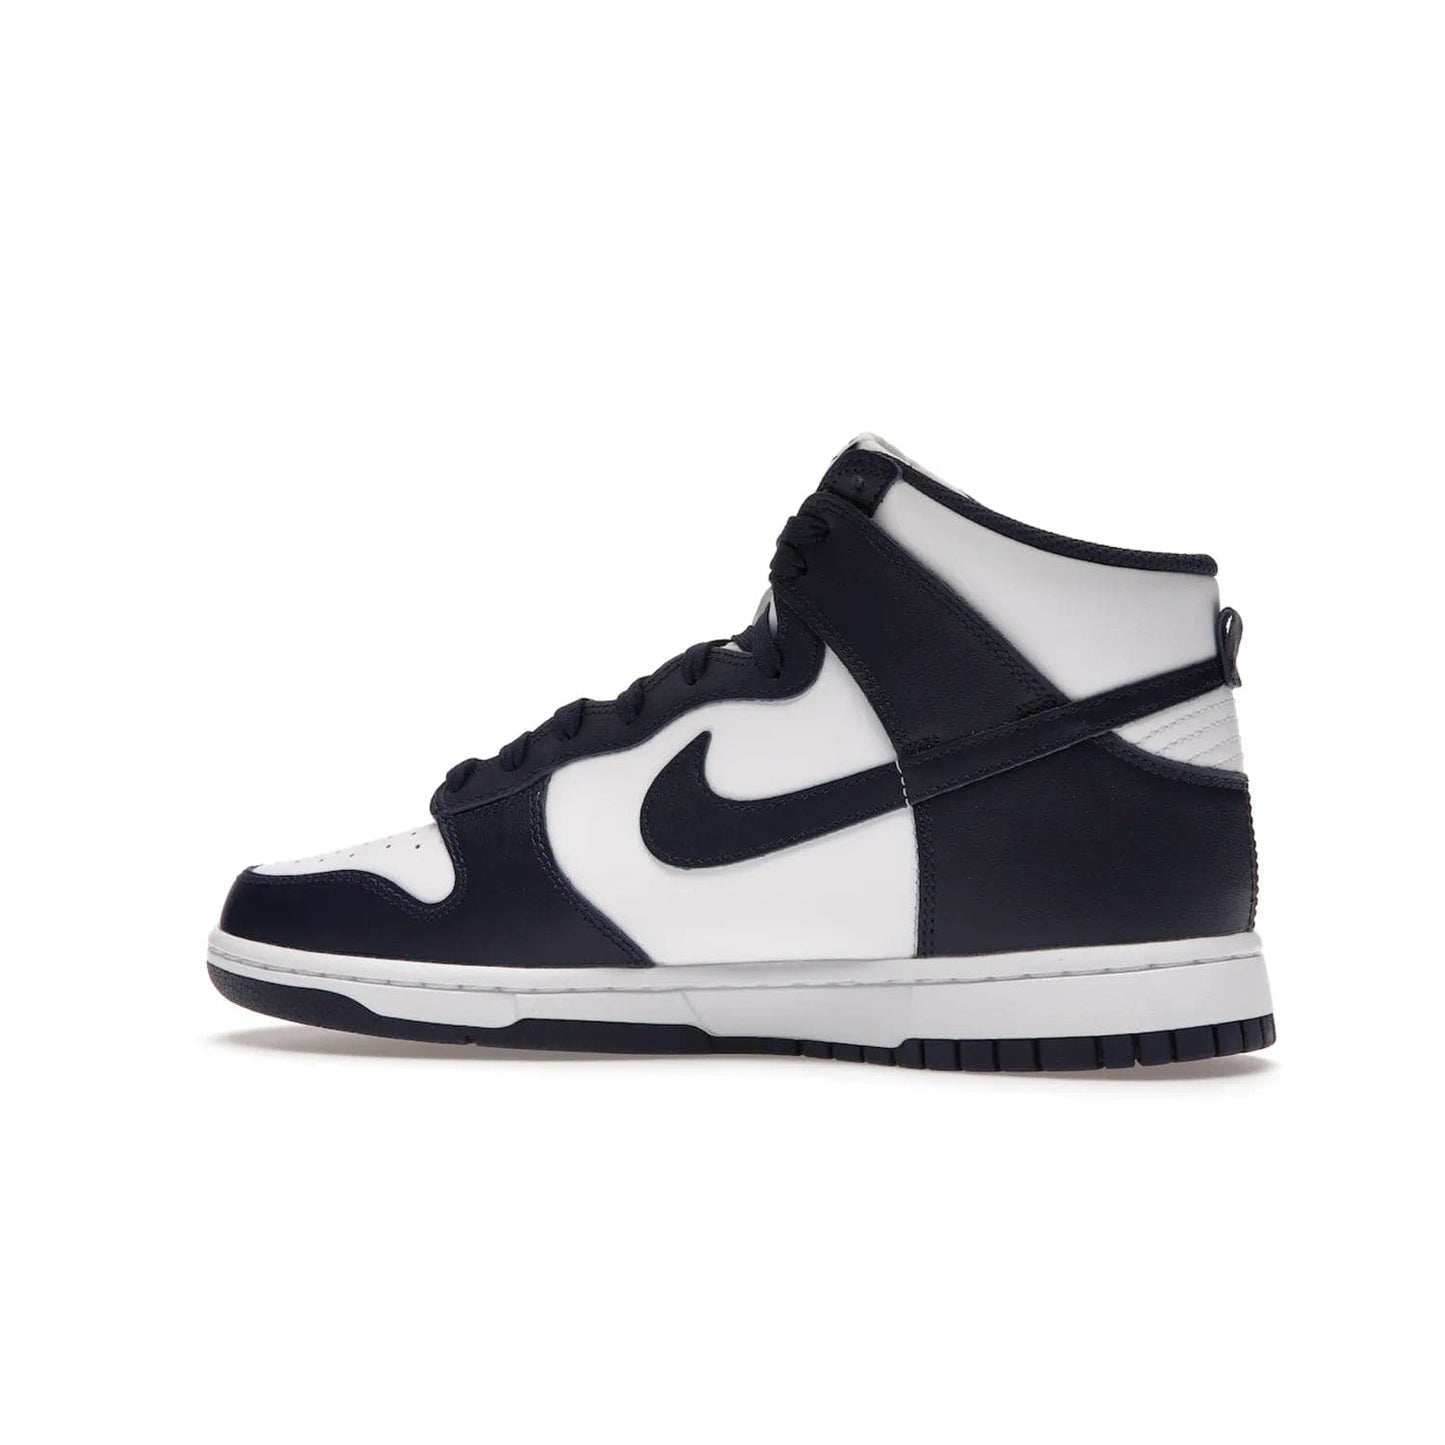 Nike Dunk High Championship Navy - Image 21 - Only at www.BallersClubKickz.com - Classic Nike Dunk High sneaker delivers an unforgettable style with white leather upper, Championship Navy overlays, and matching woven tongue label and sole. Make a statement with the Championship Navy today.